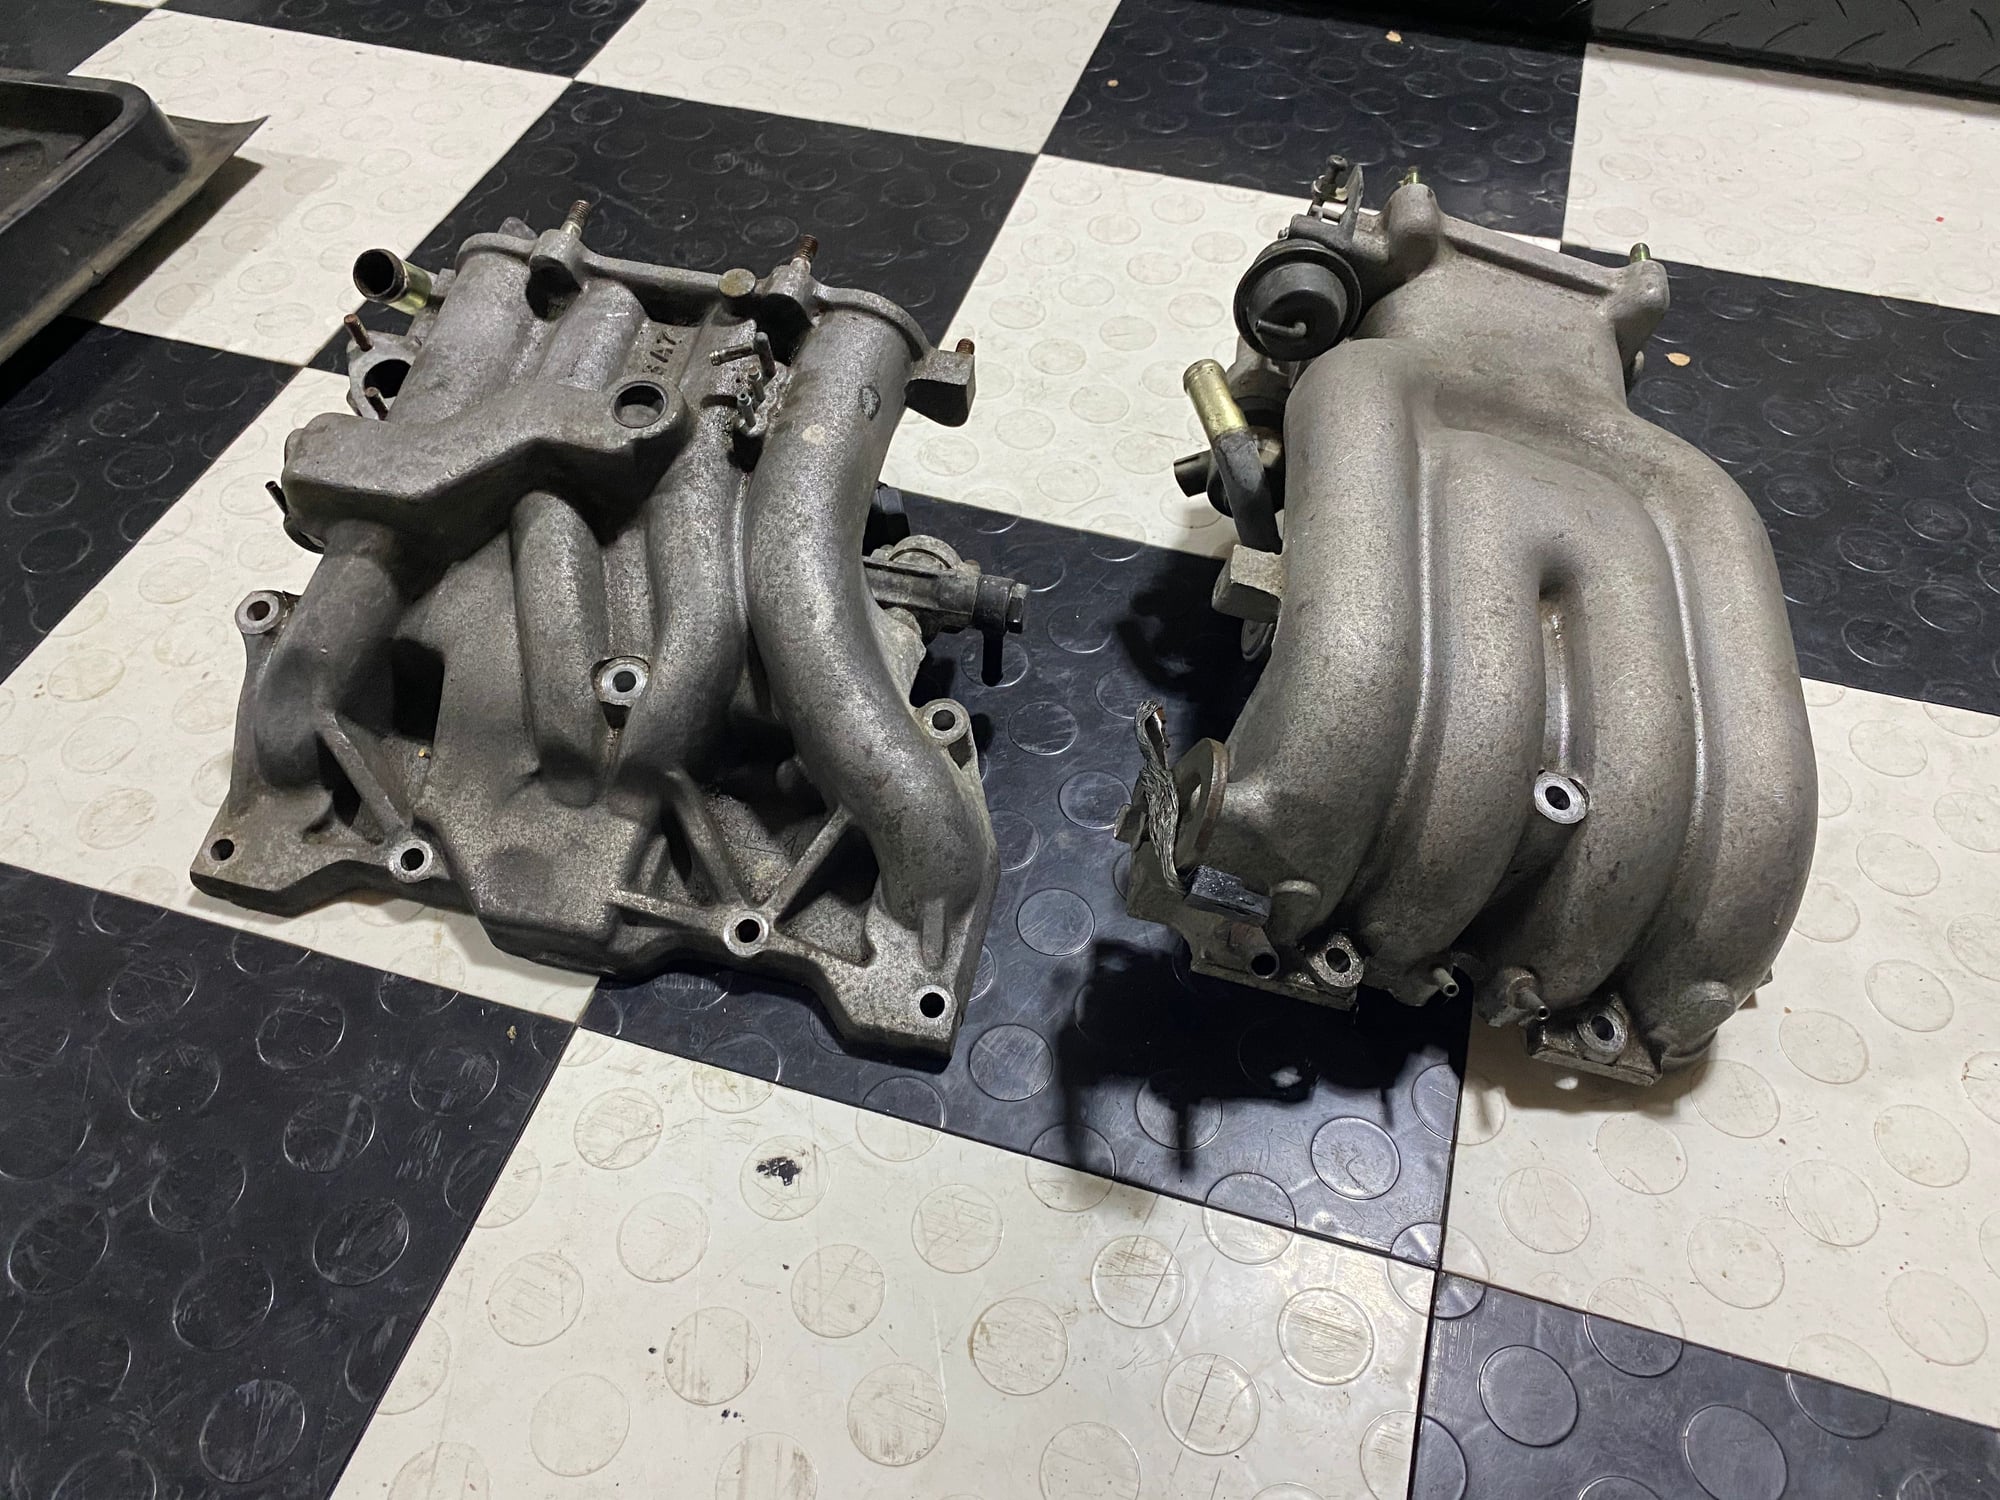 Engine - Intake/Fuel - FD Upper and Lower Intake manifolds - Used - 1993 to 1995 Mazda RX-7 - Lantana, TX 76226, United States